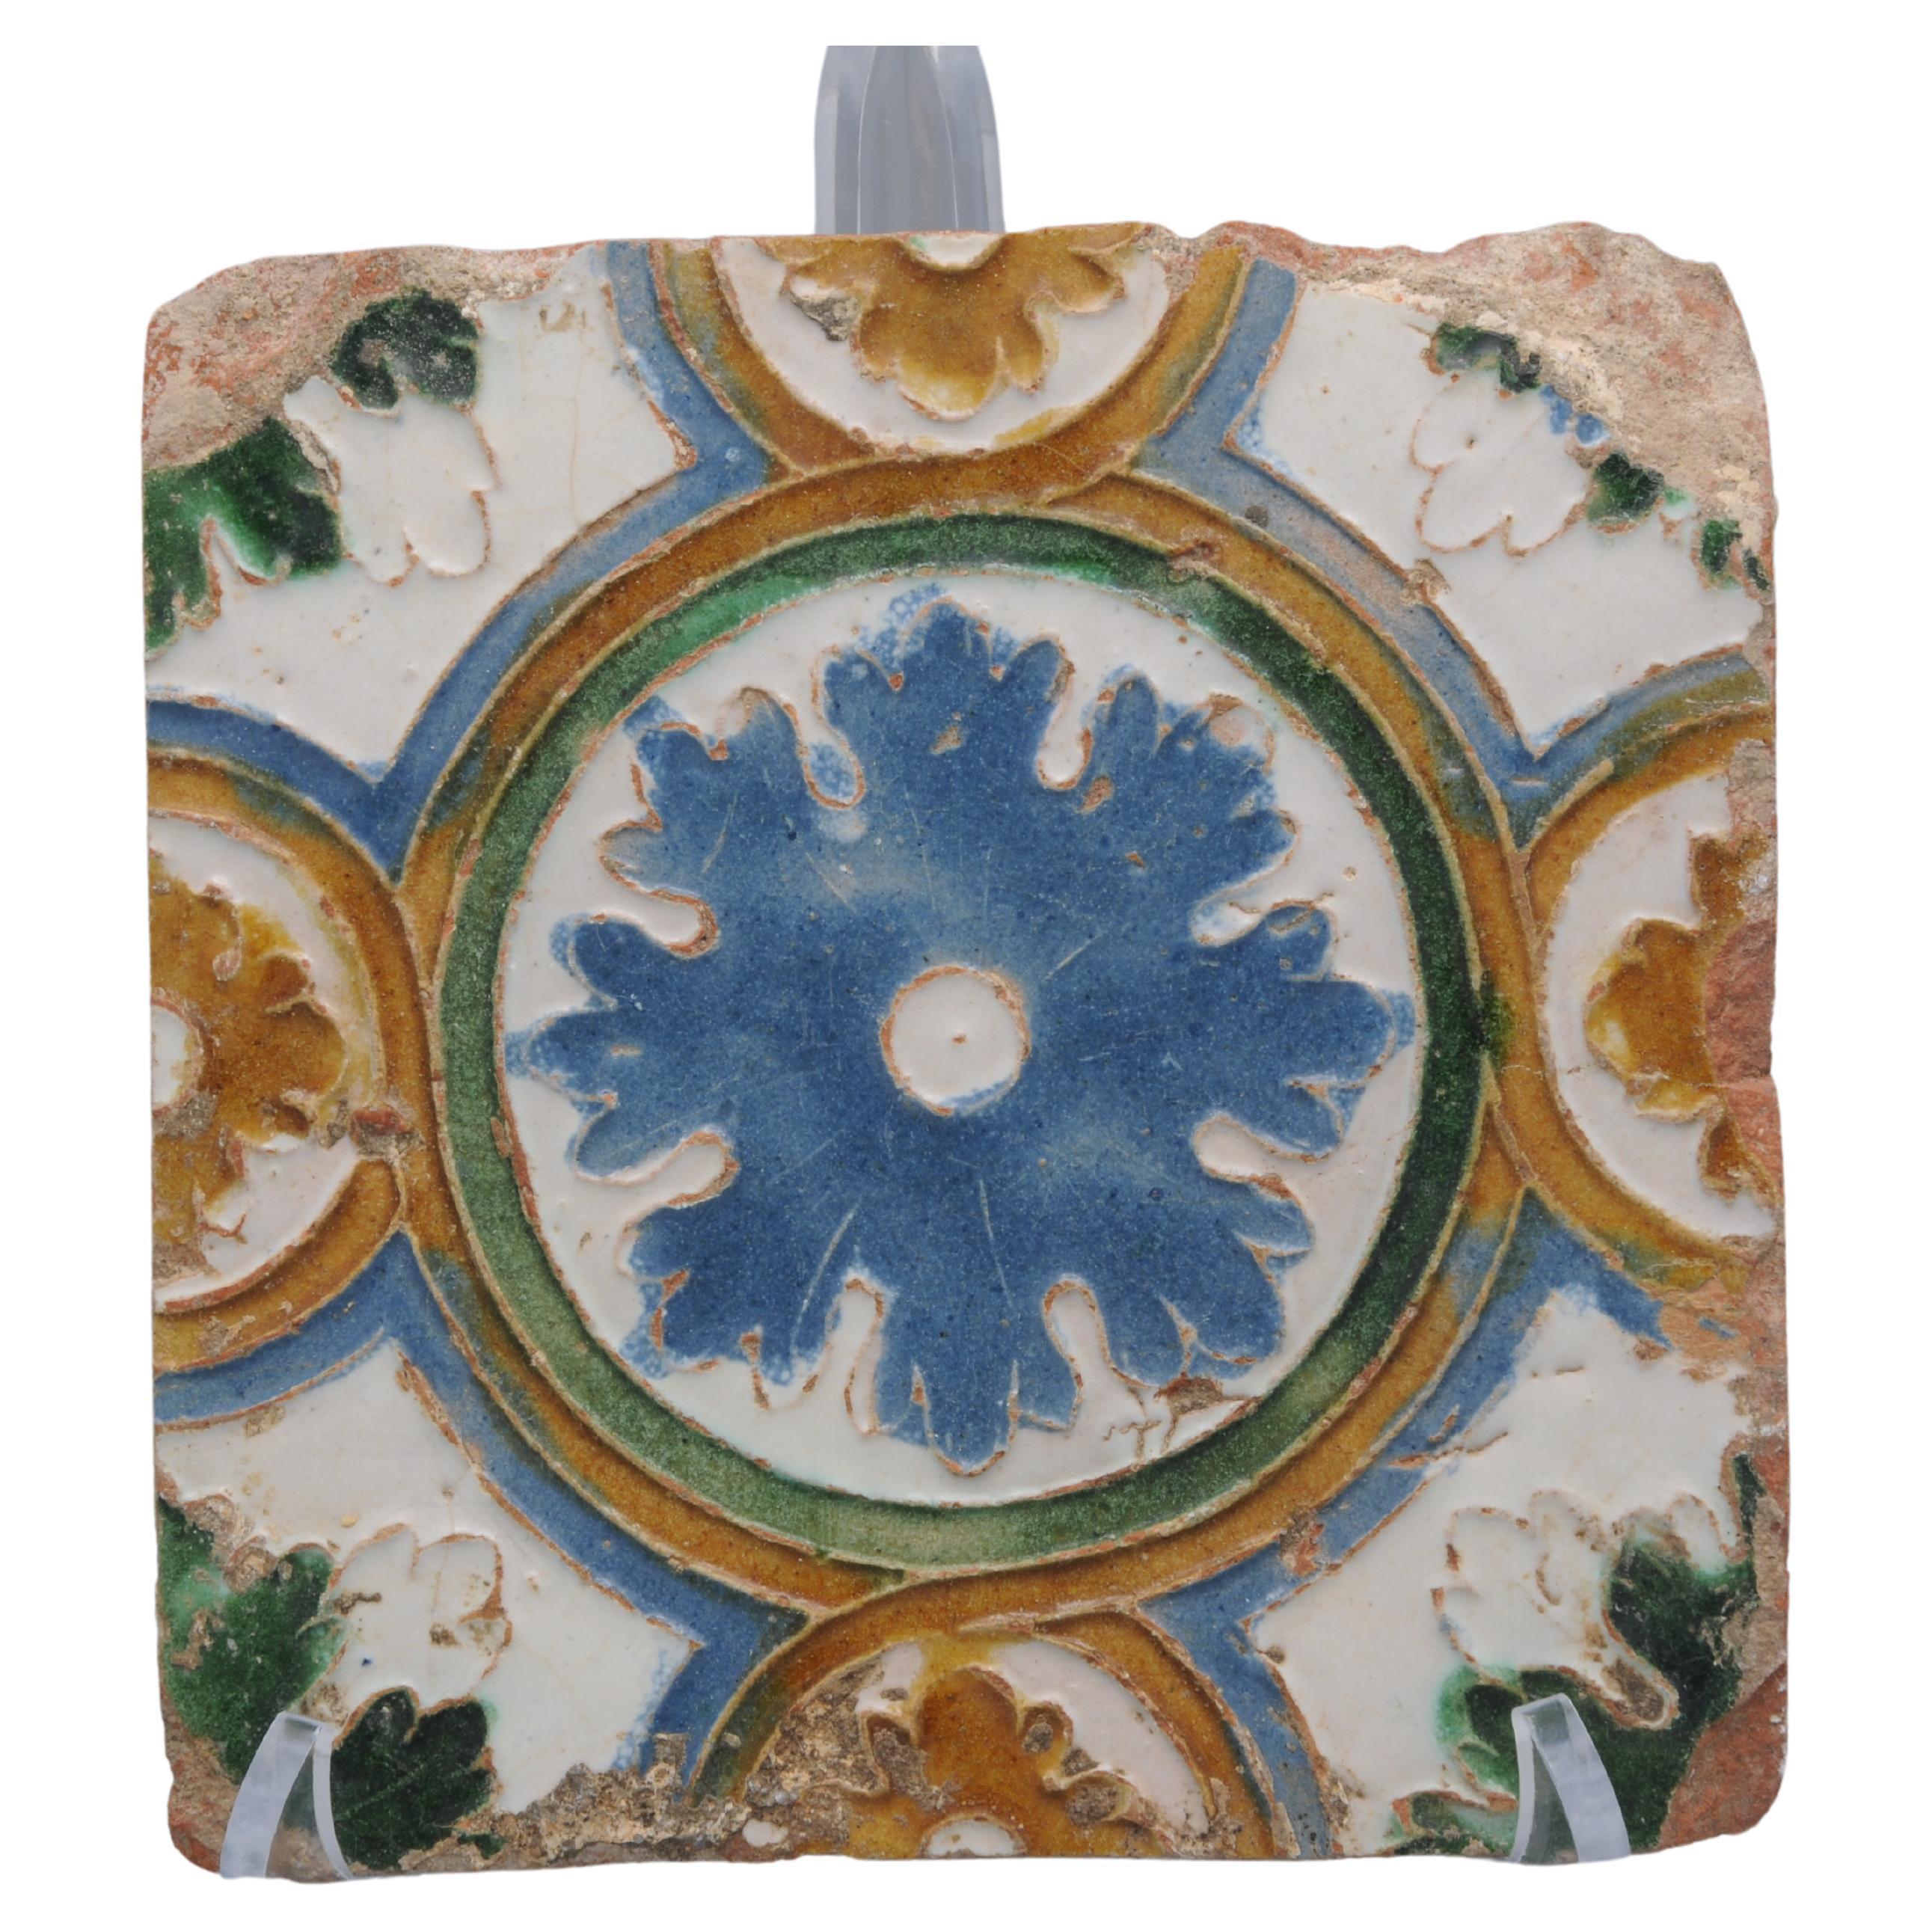 Early Arista y cuenca tile made in Toledo. Tile decorated in renaissance with stylized flowers, probably made between 1550 and 1575. 


